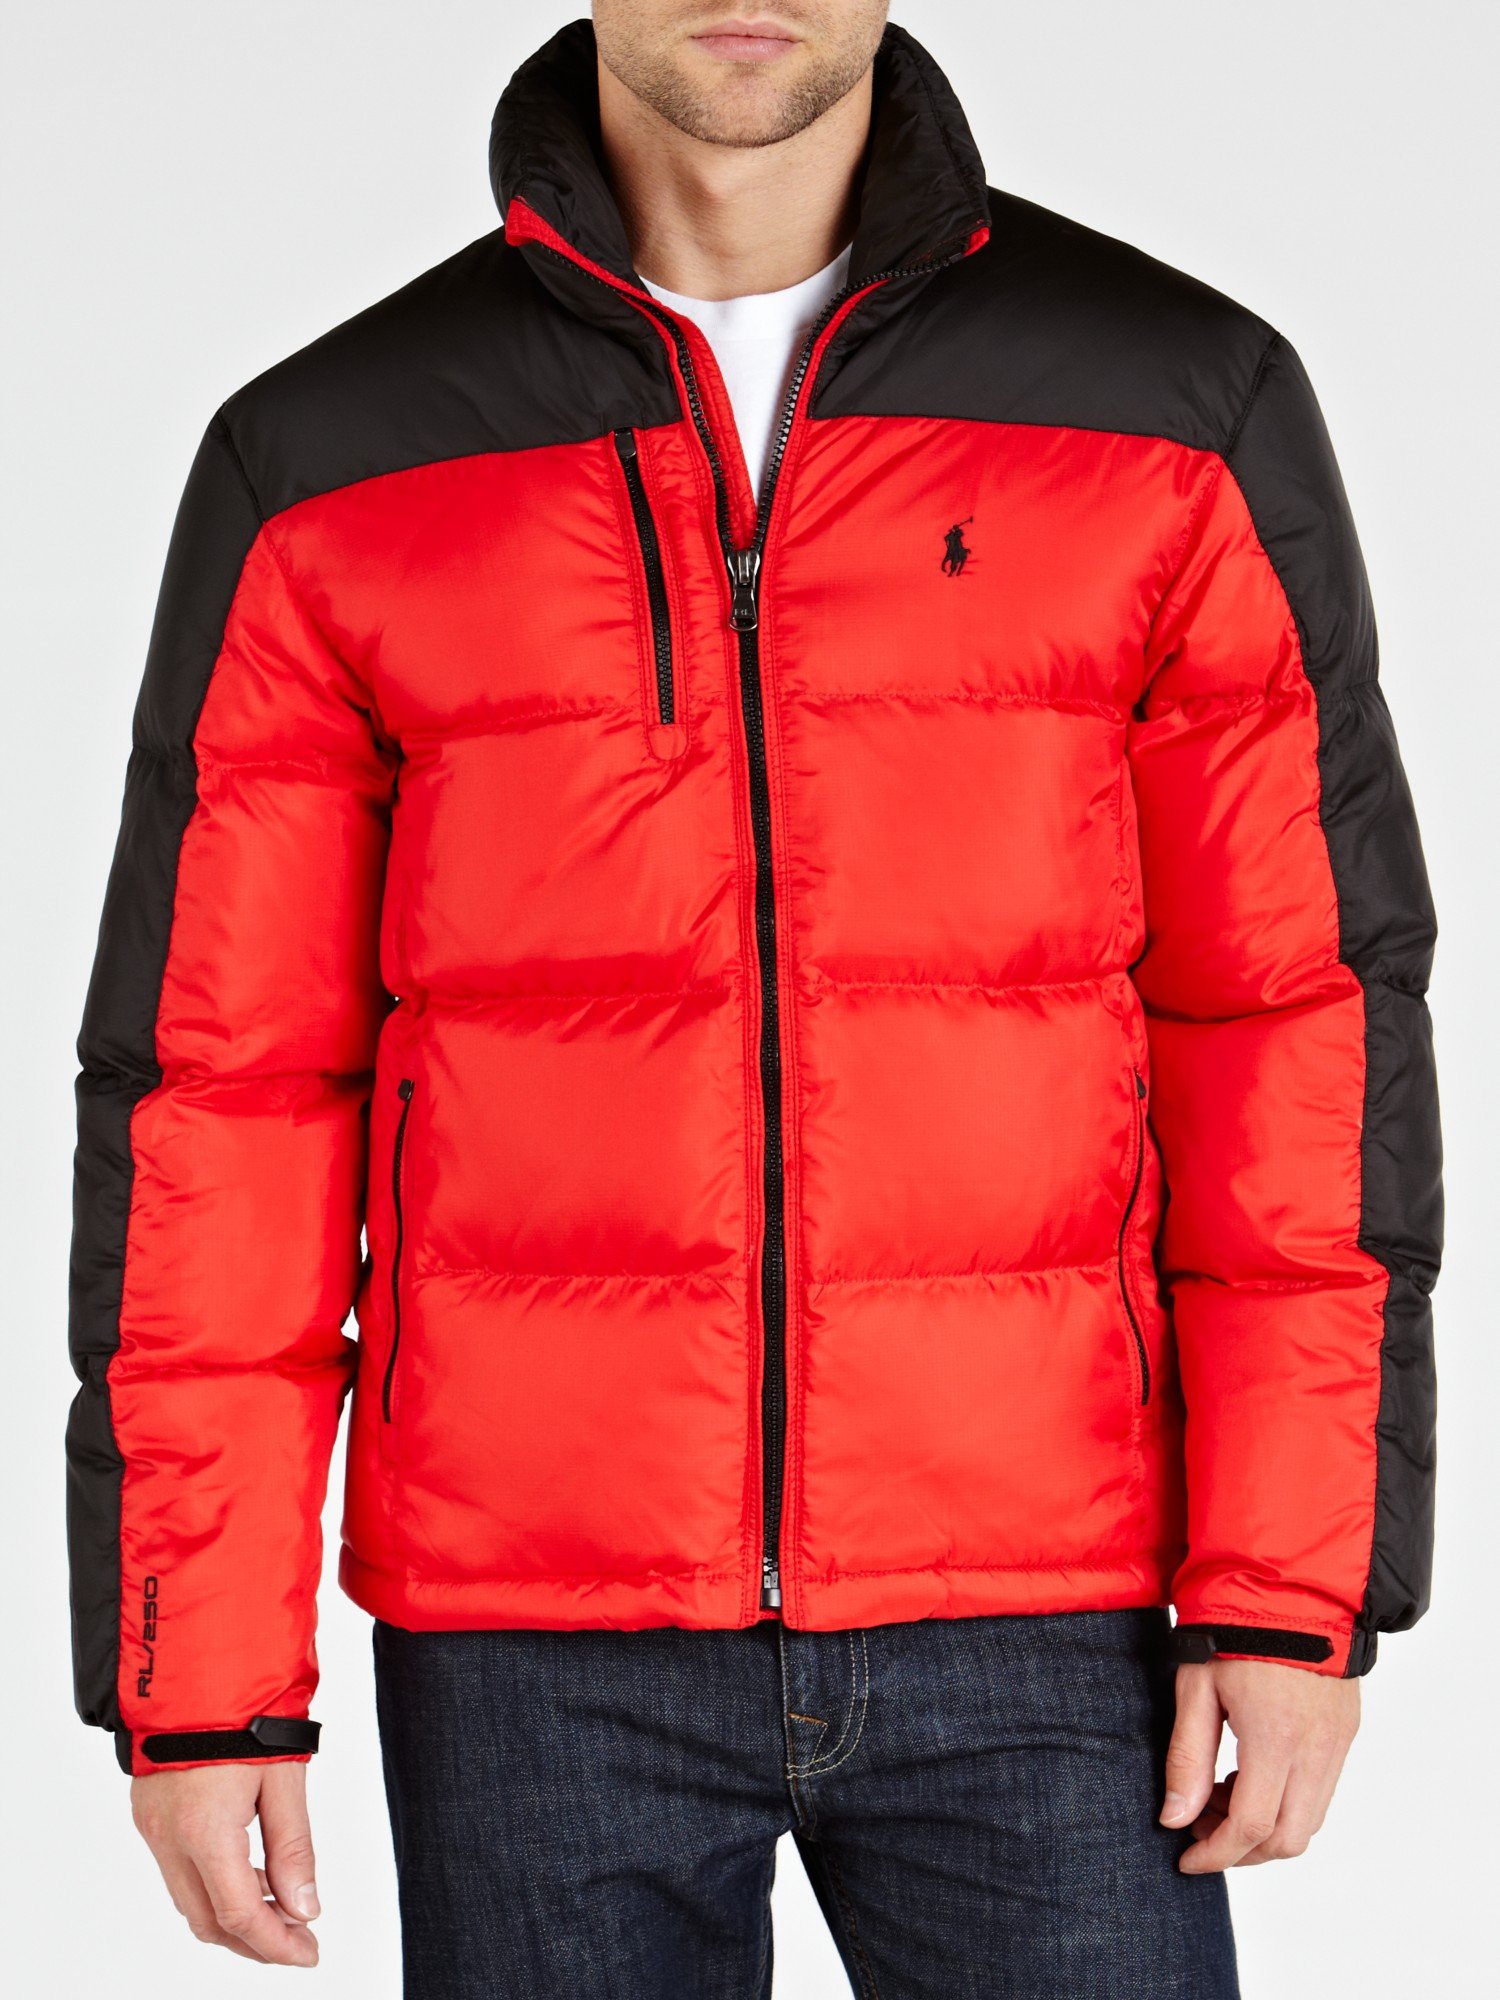 polo red puffer jacket